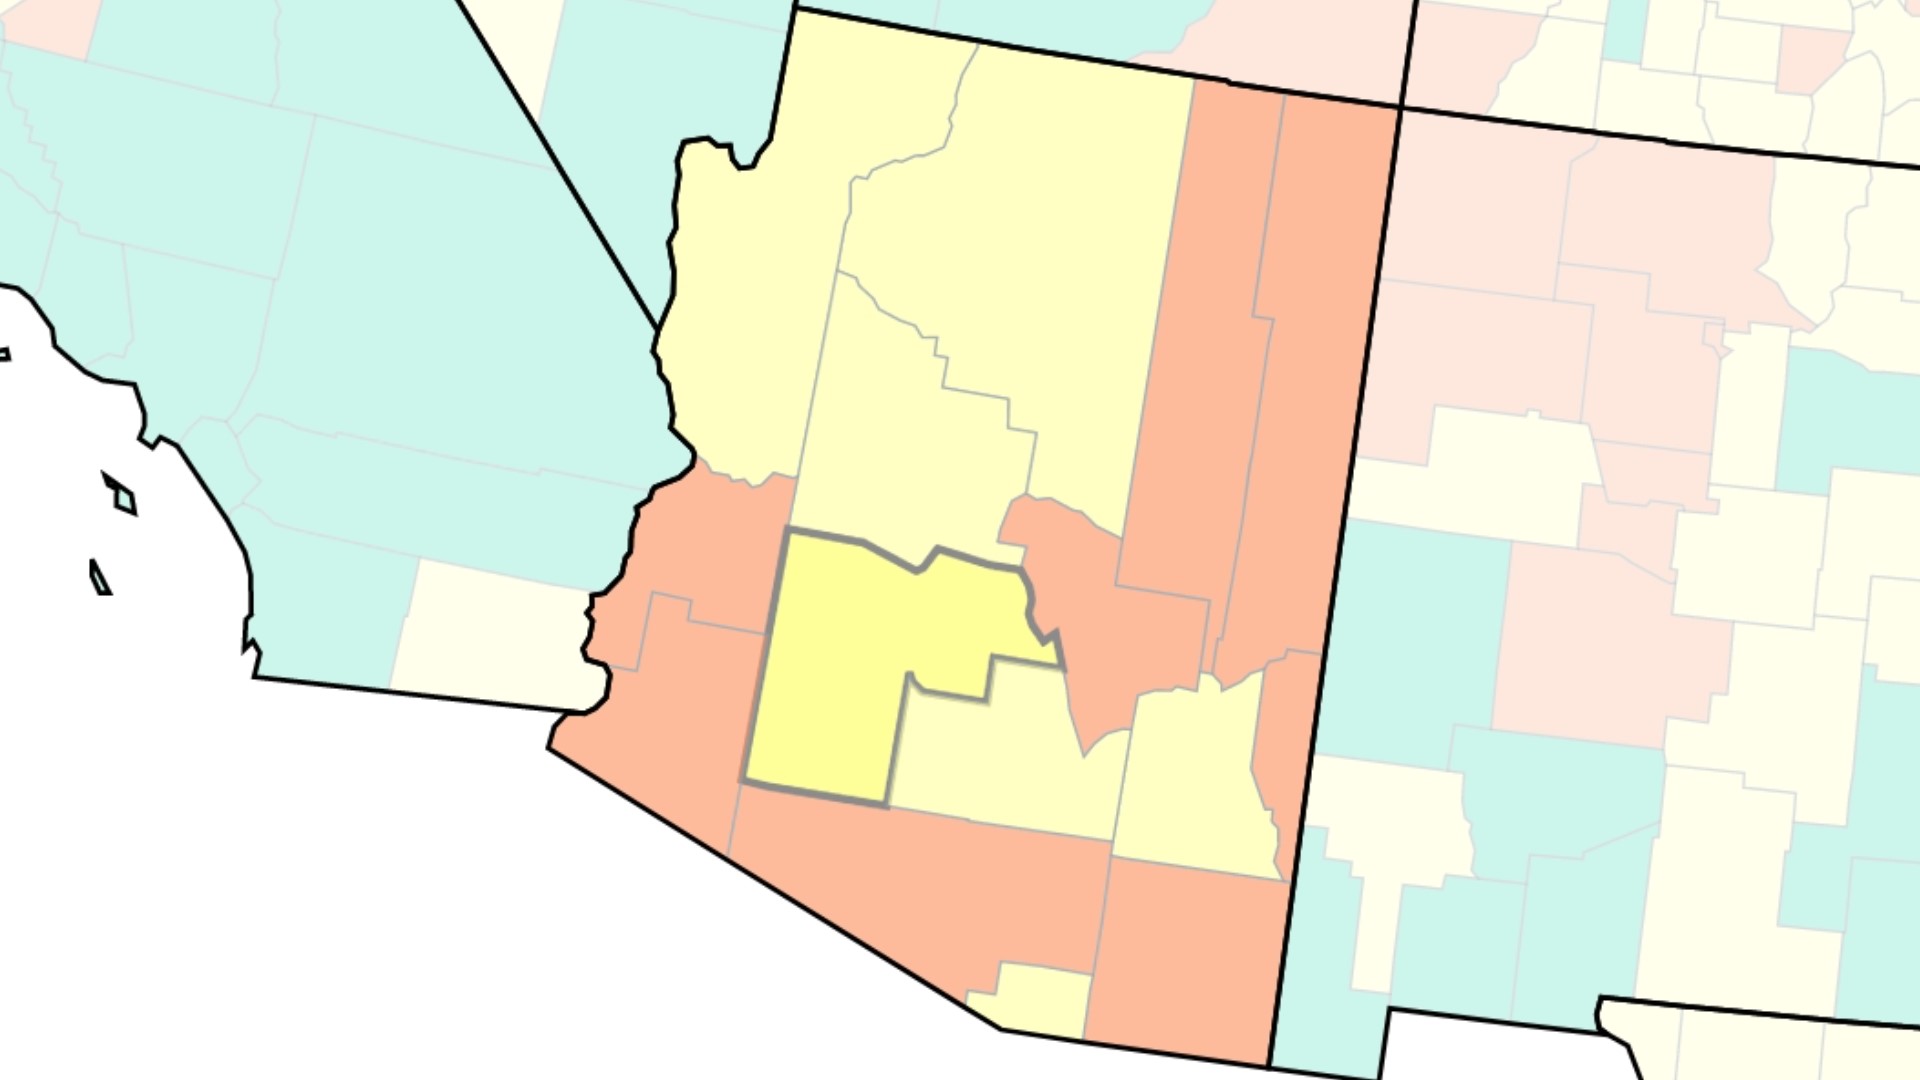 Pima, Gila, Cochise, and Apache counties are among the areas listed as having "high" community levels of COVID-19.